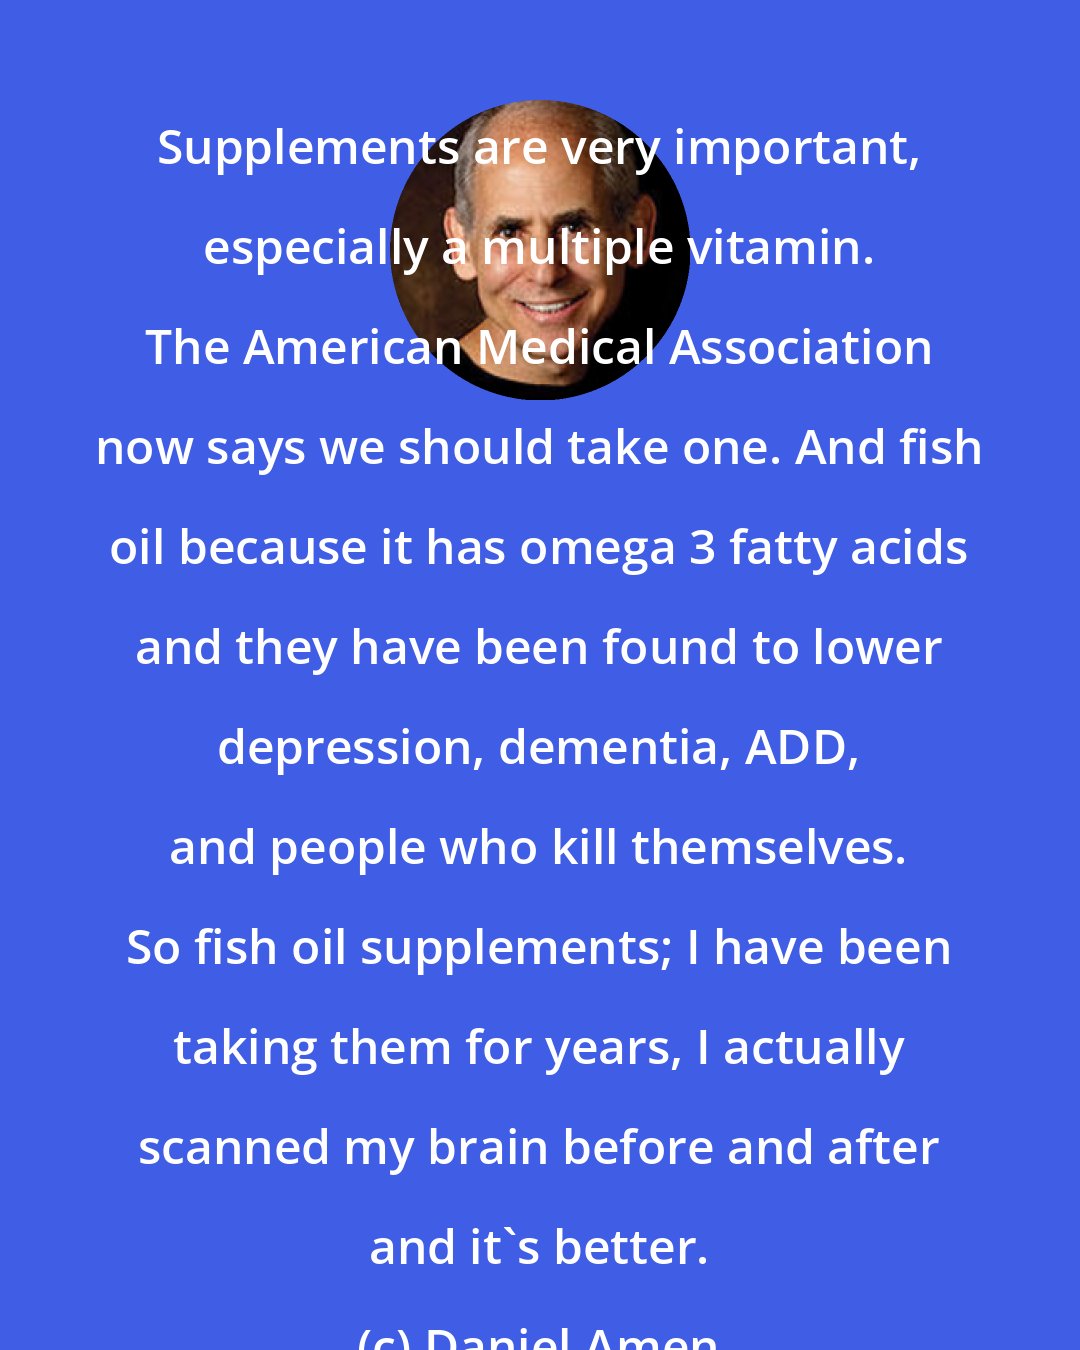 Daniel Amen: Supplements are very important, especially a multiple vitamin. The American Medical Association now says we should take one. And fish oil because it has omega 3 fatty acids and they have been found to lower depression, dementia, ADD, and people who kill themselves. So fish oil supplements; I have been taking them for years, I actually scanned my brain before and after and it's better.